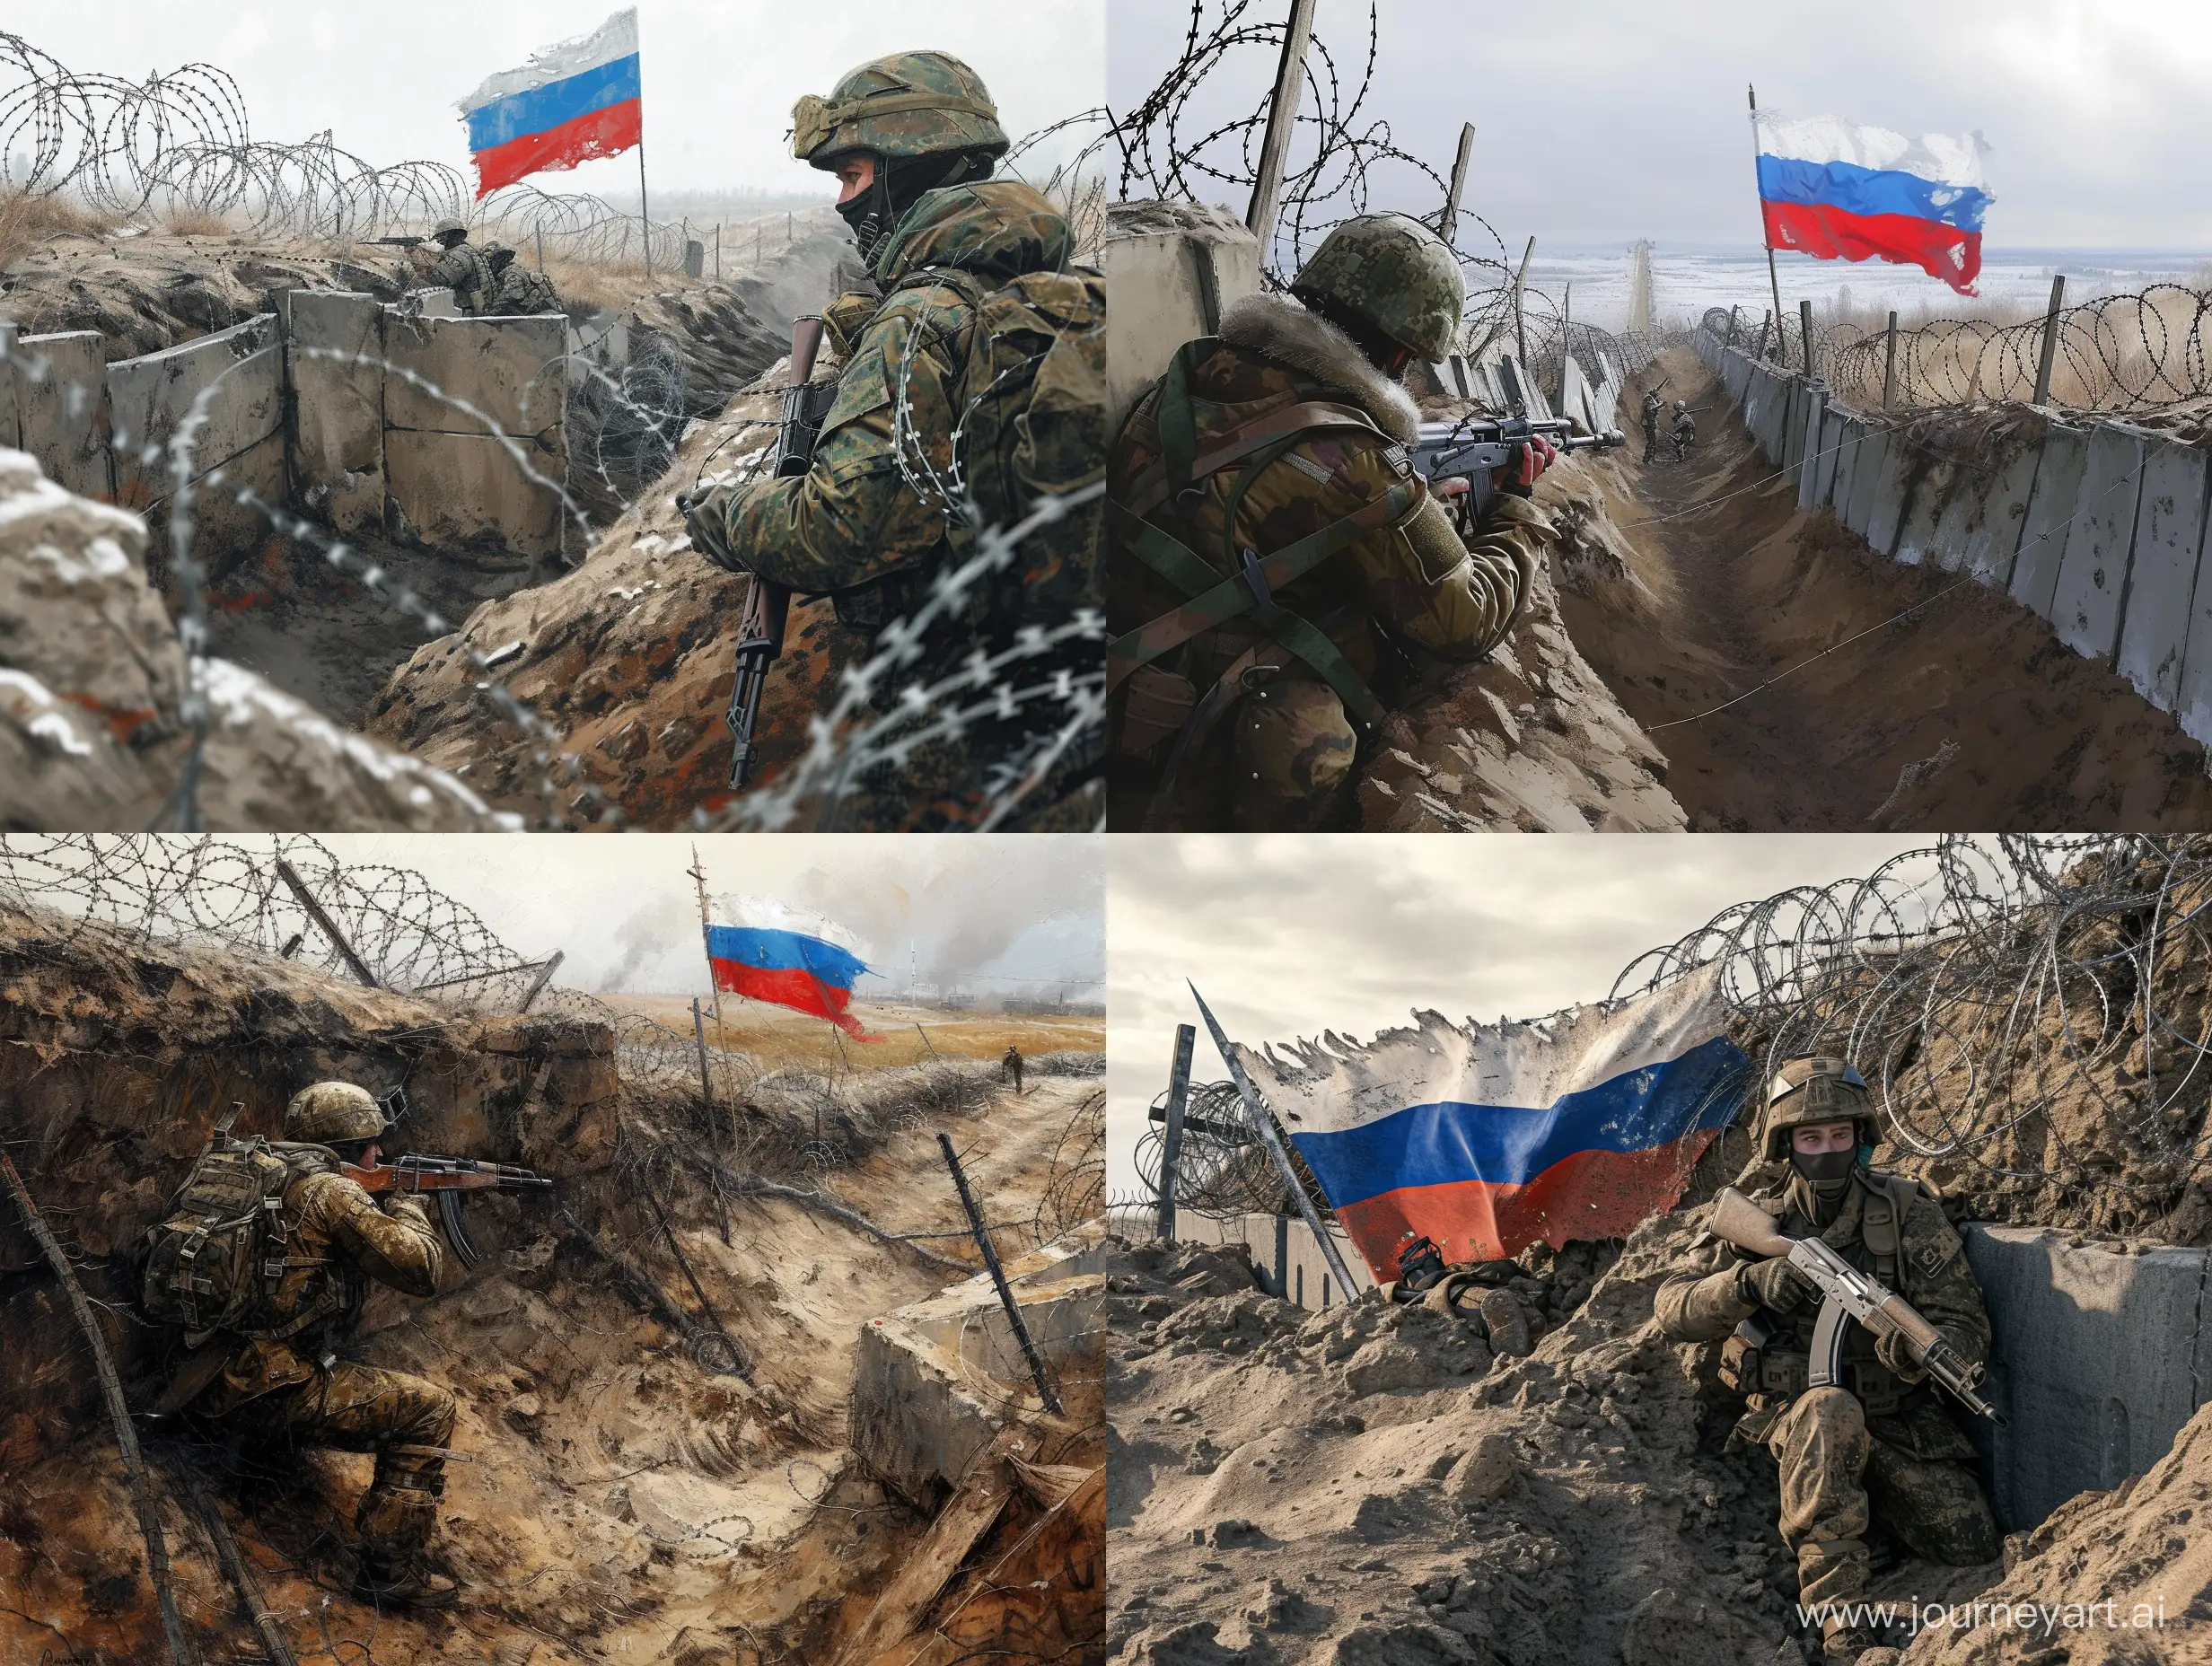 Modern-Russian-Soldier-at-Trench-Checkpoint-with-Barbed-Wire-and-Kalashnikov